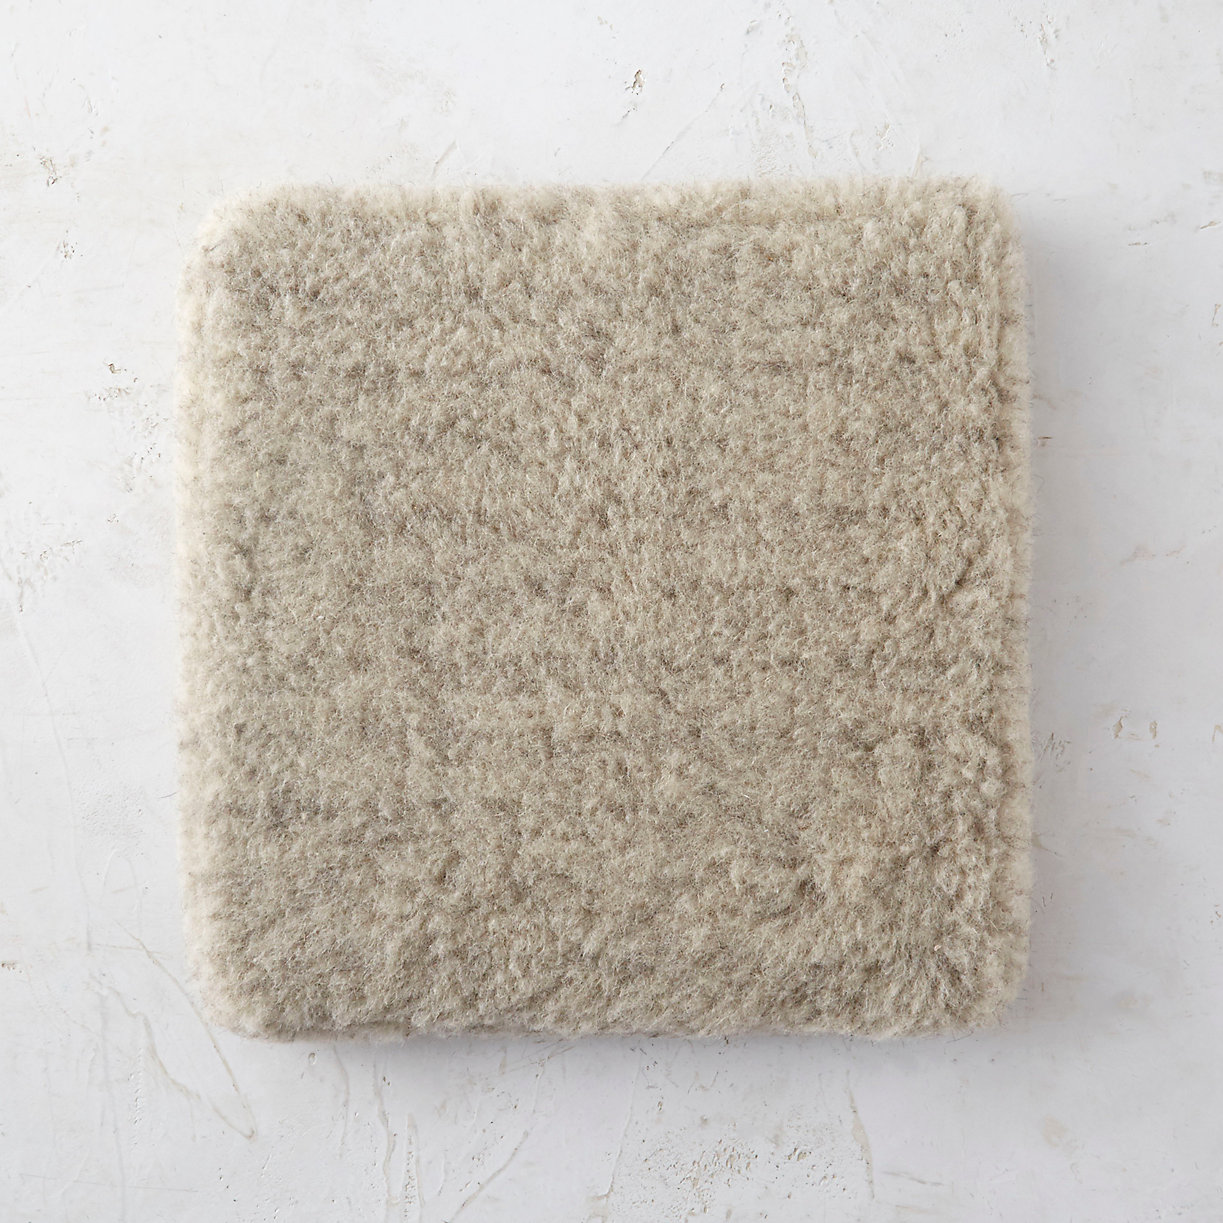 A wooly seat cushion